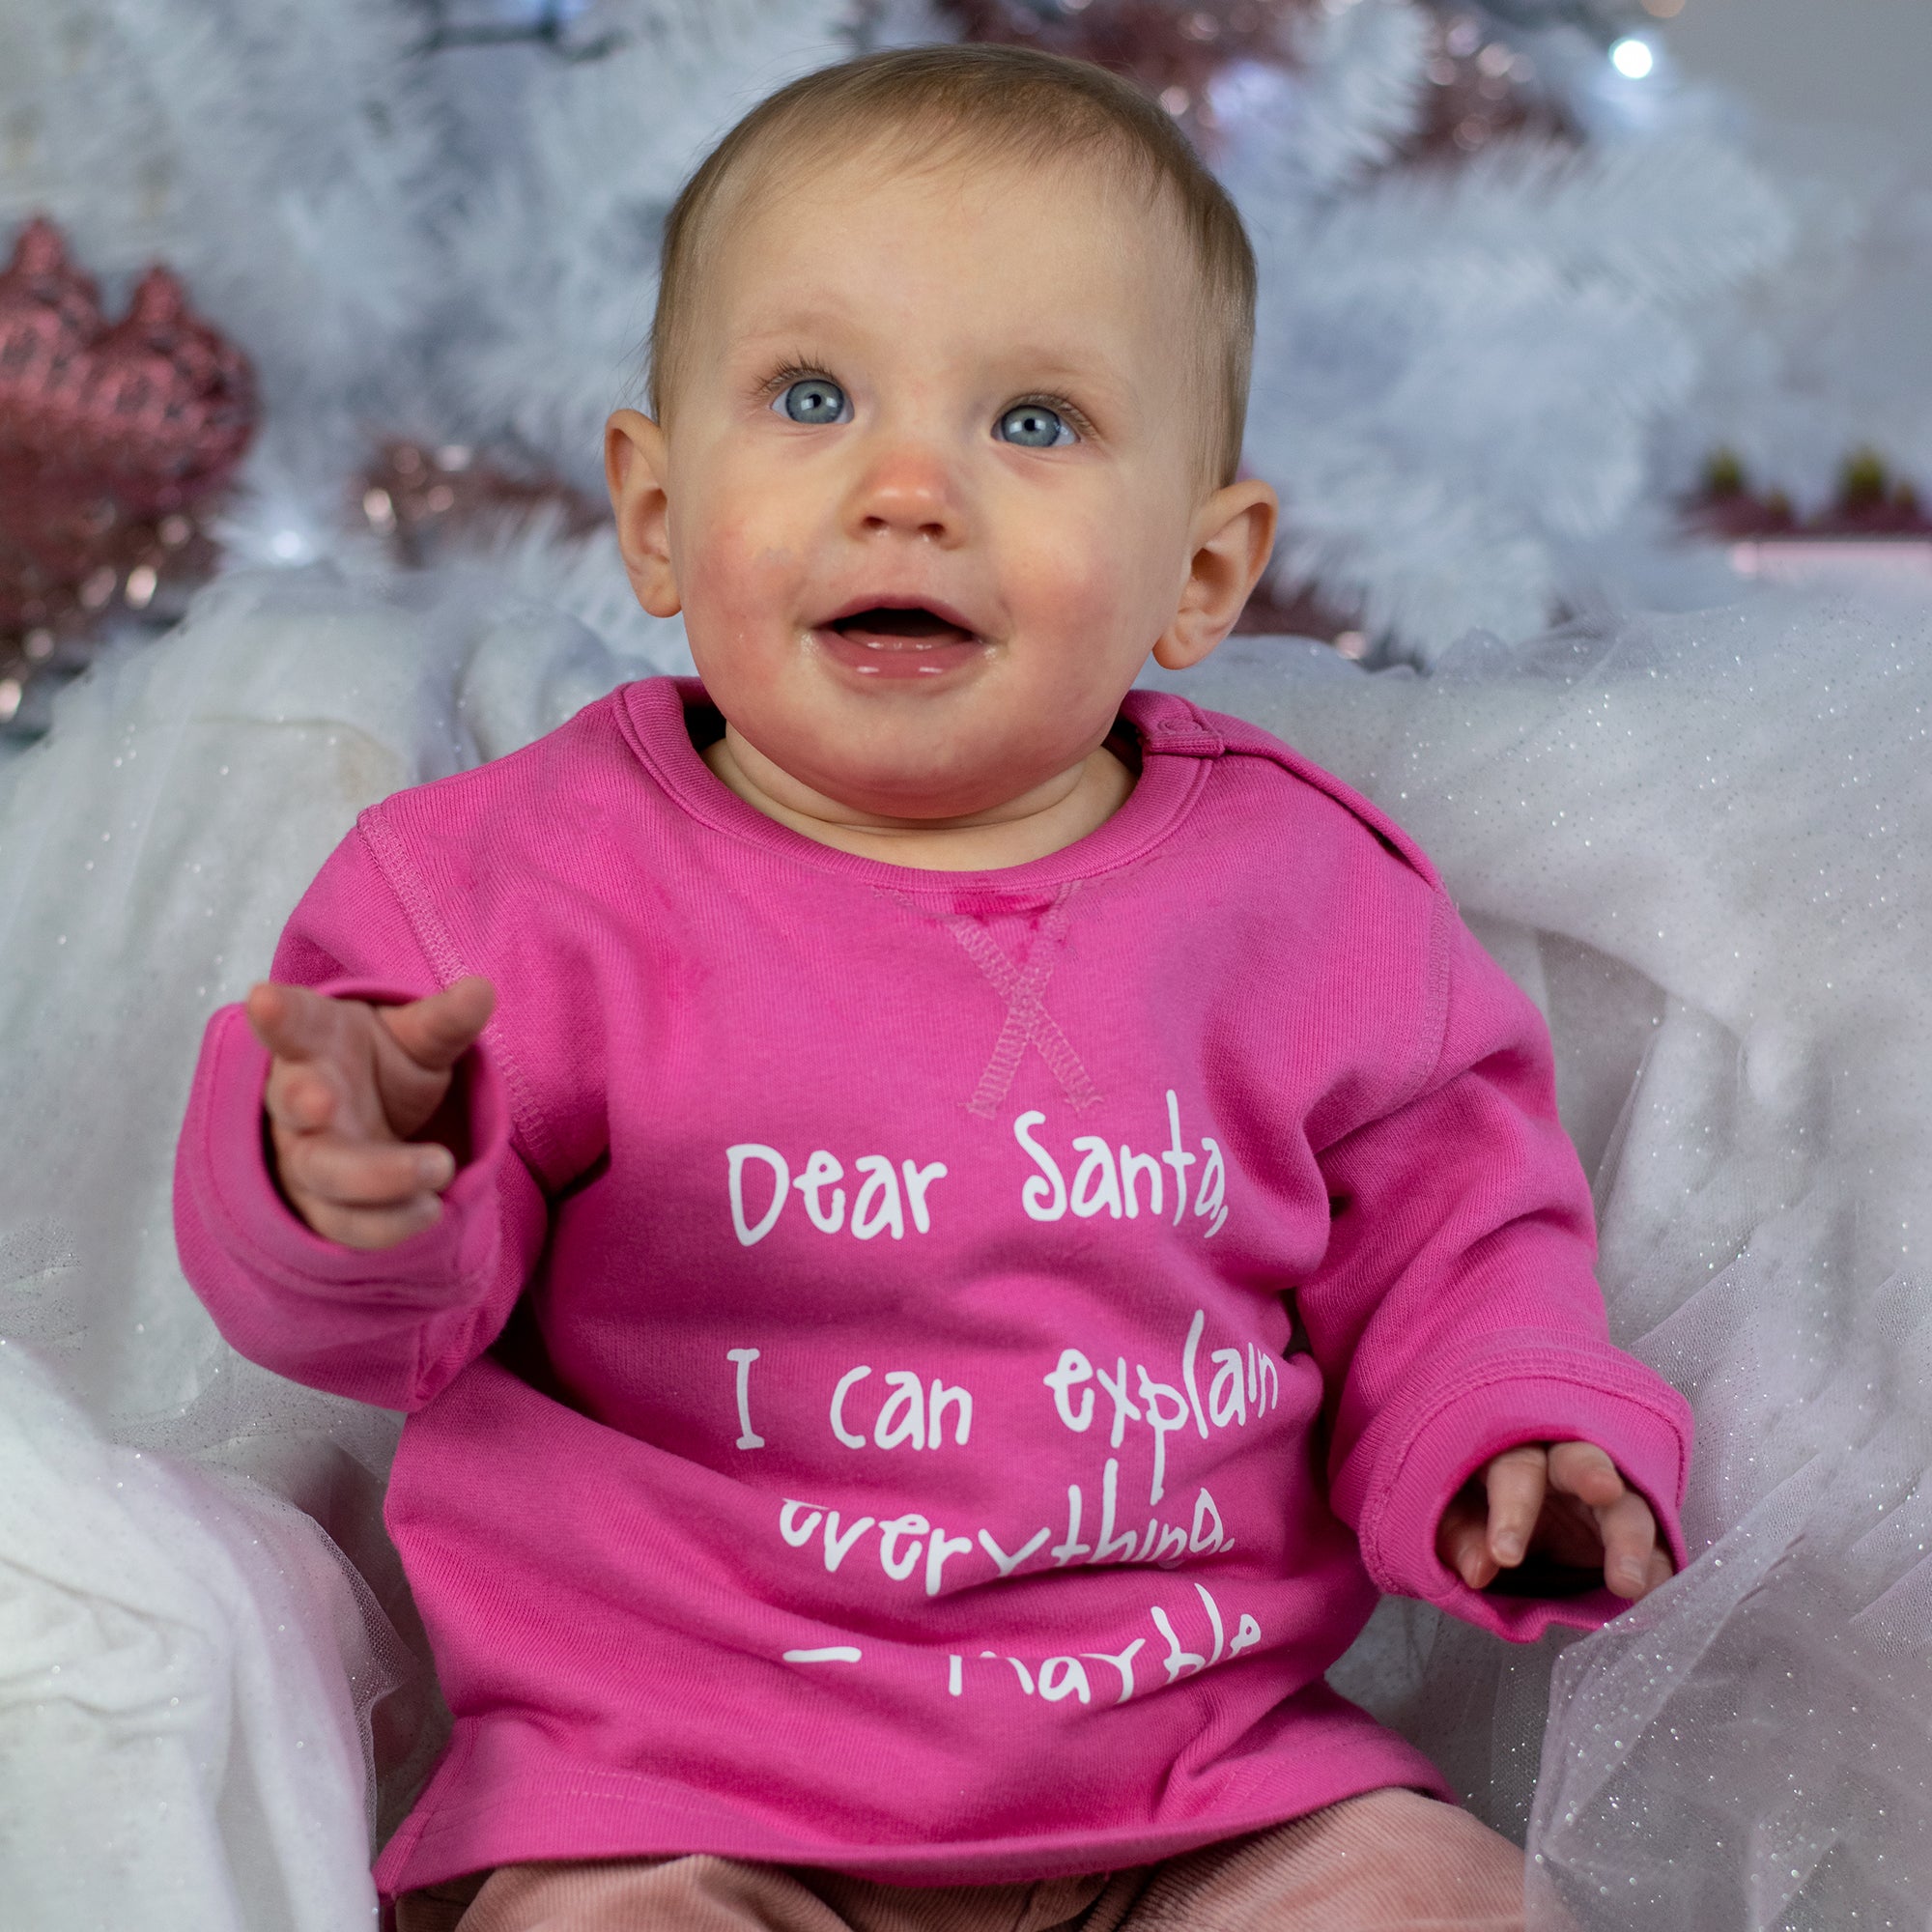 Baby girl with blue eyes and pink sweater with 'Santa, I can explain everything' sweater by KMLeon.